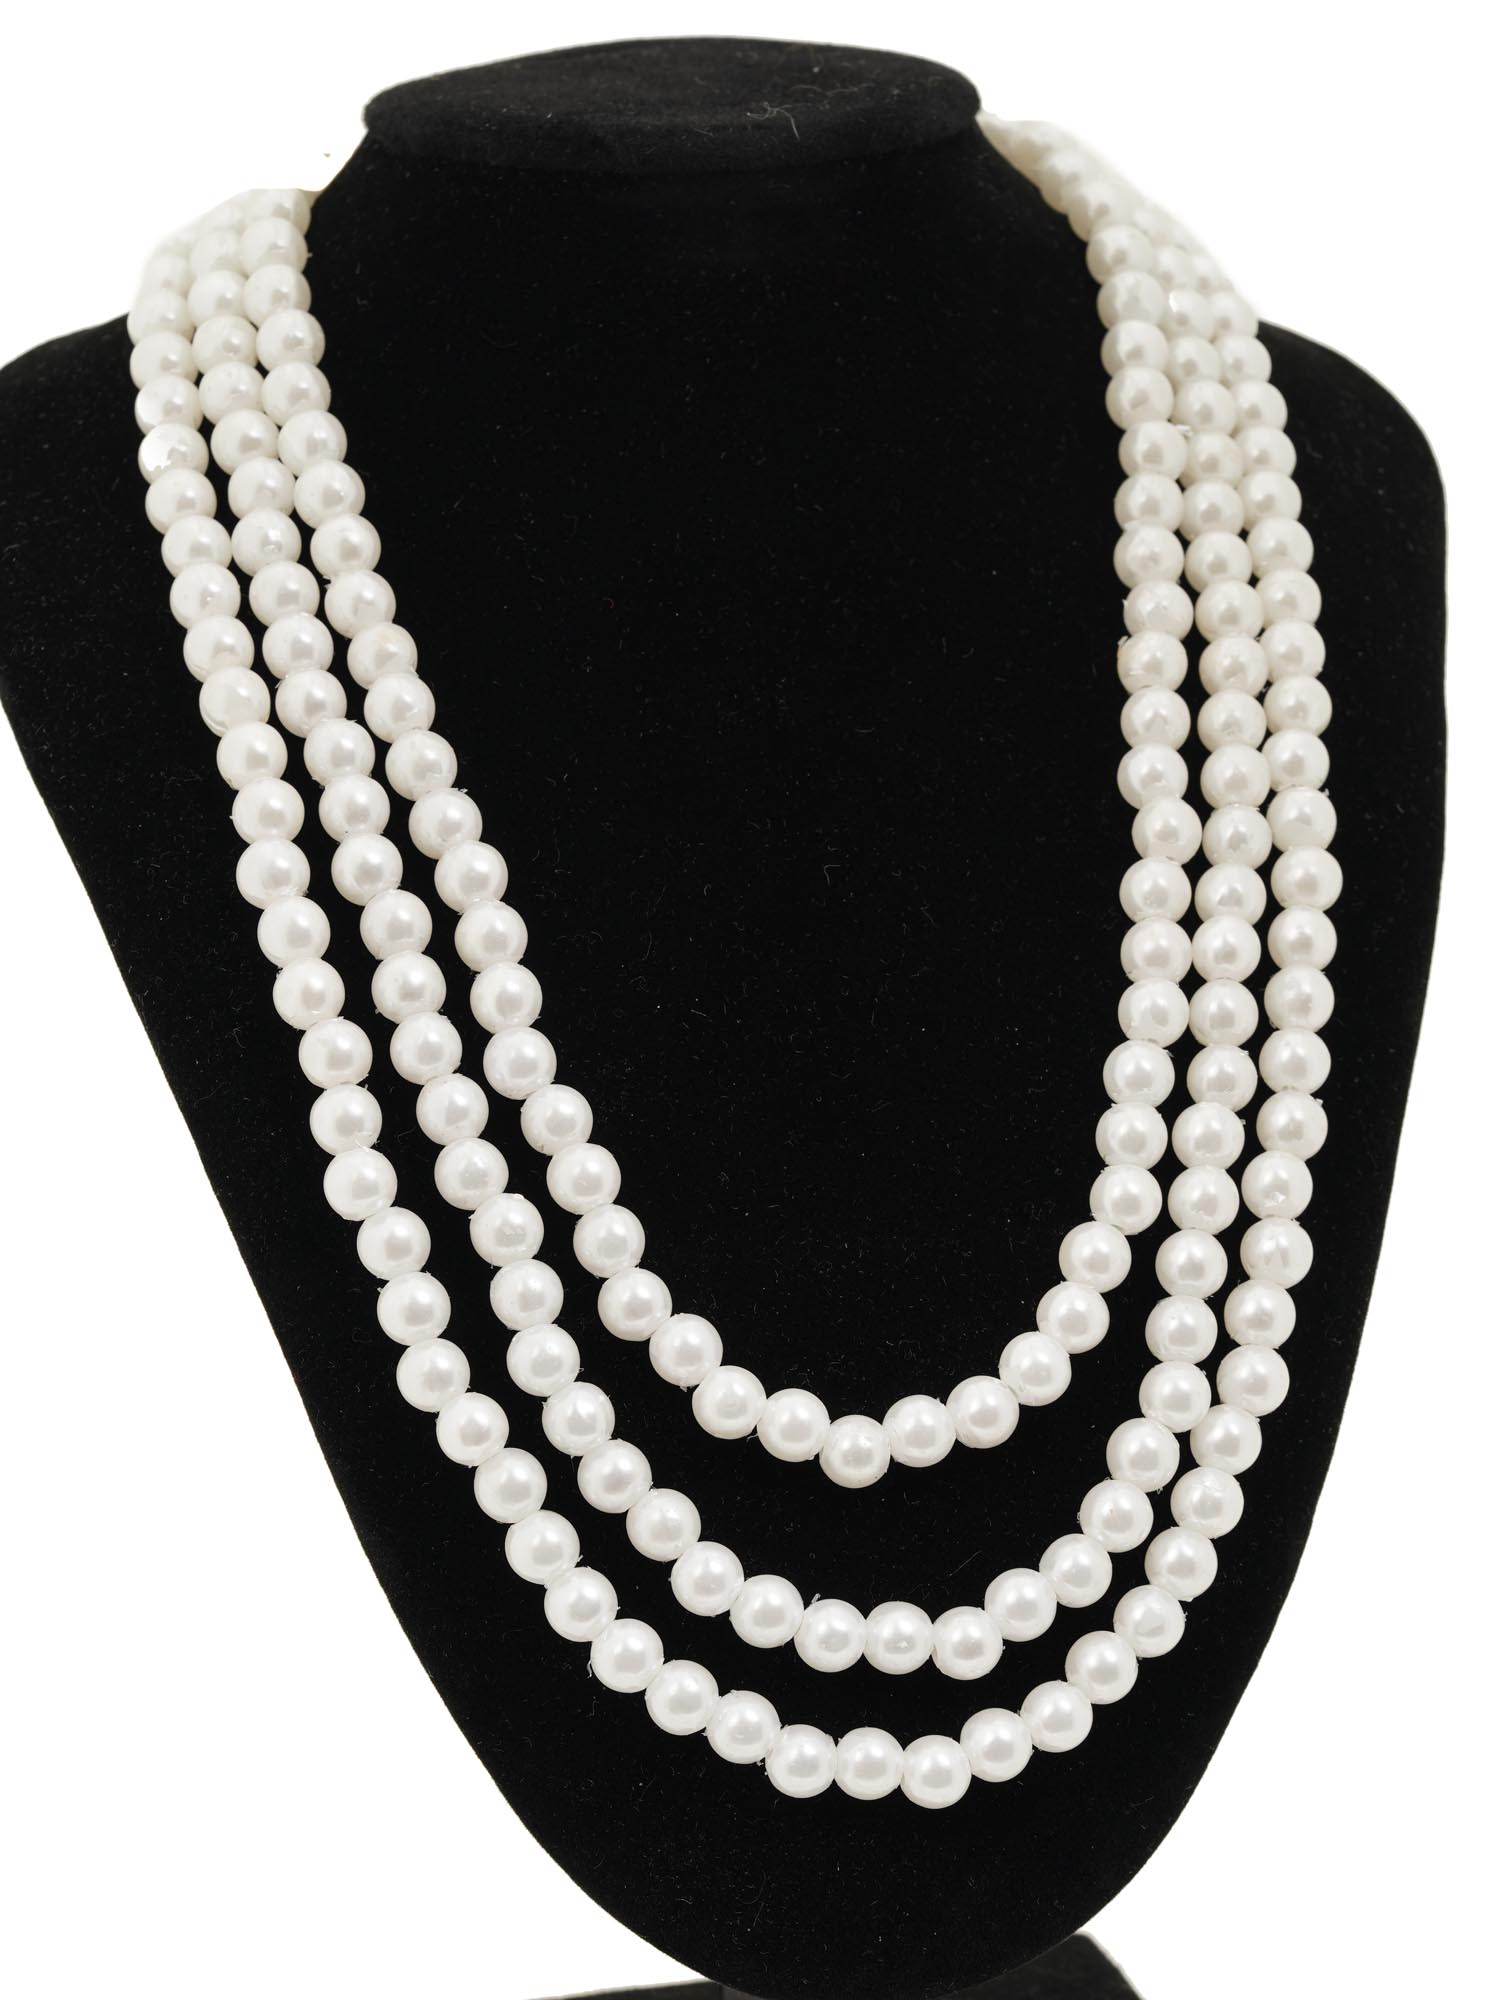 LARGE COLLECTION OF ART DECO STYLE PEARL JEWELRY PIC-4